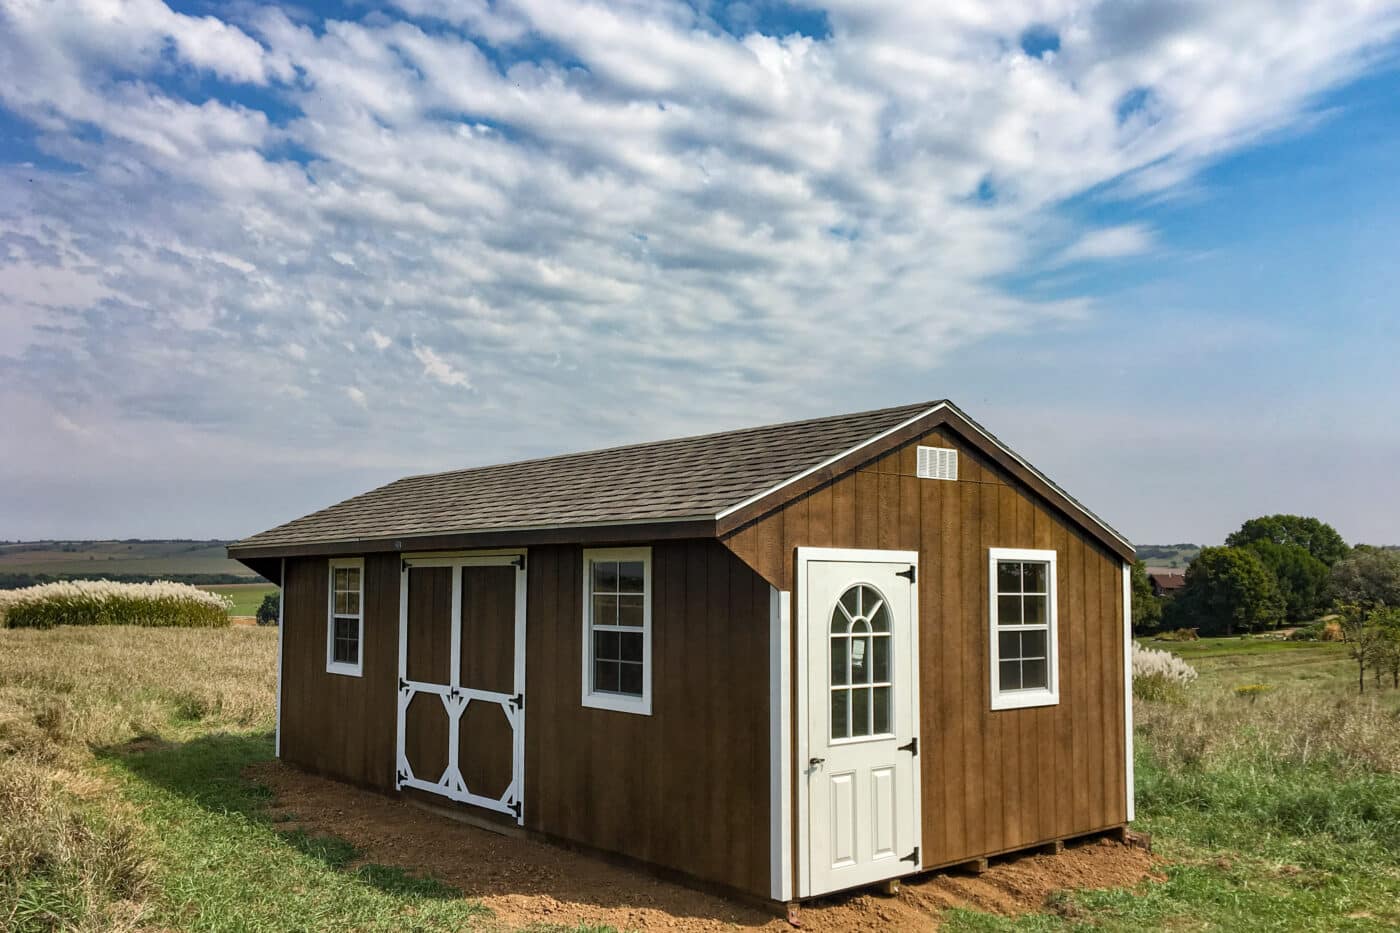 Brown Quaker storage shed in field